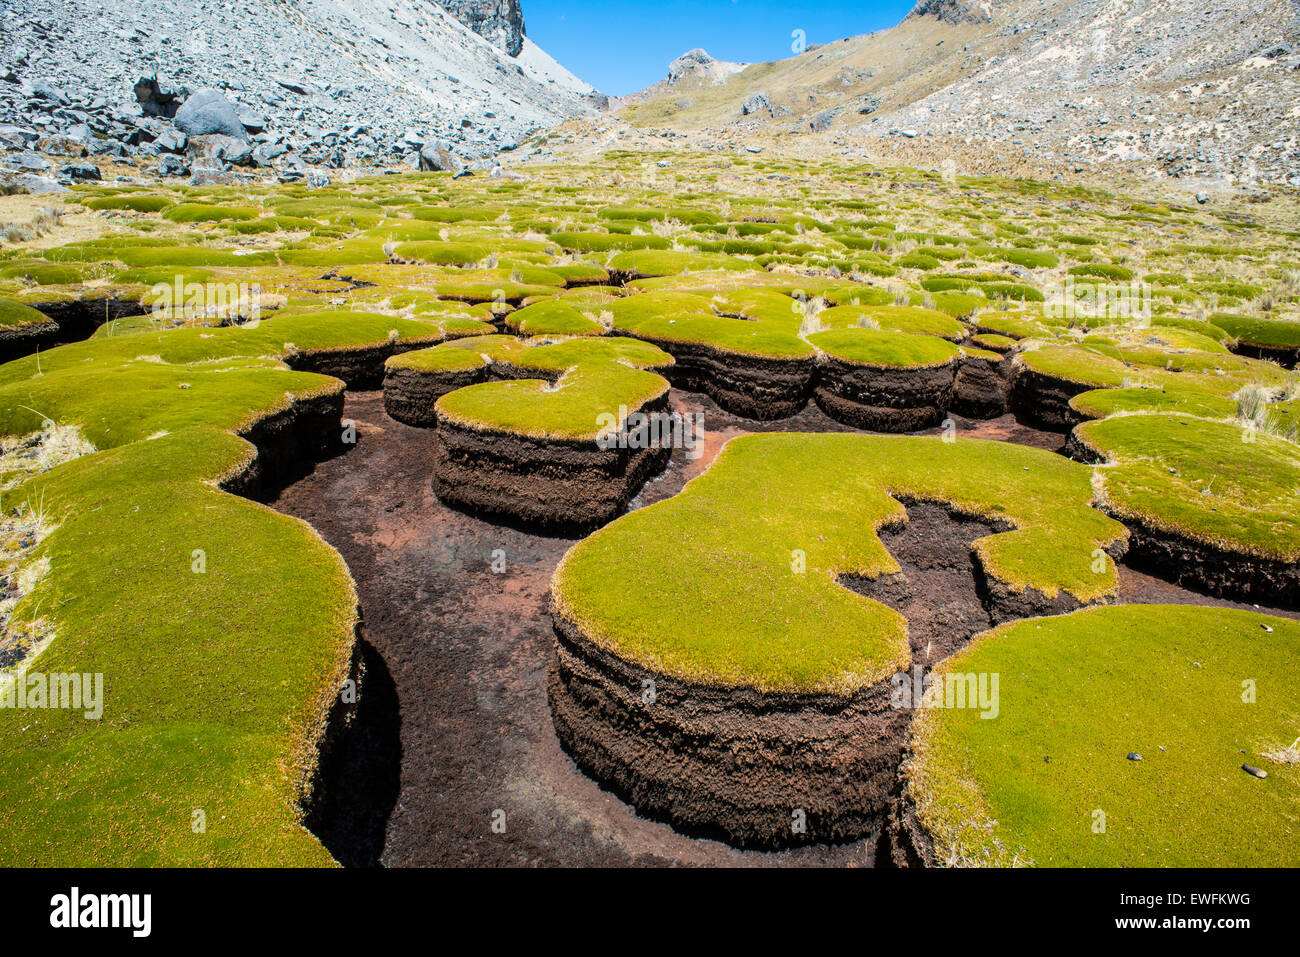 Plants forming cushions, washed out from the water, Cordillera Huayhuash mountain range, Andes, northern Peru, Peru Stock Photo